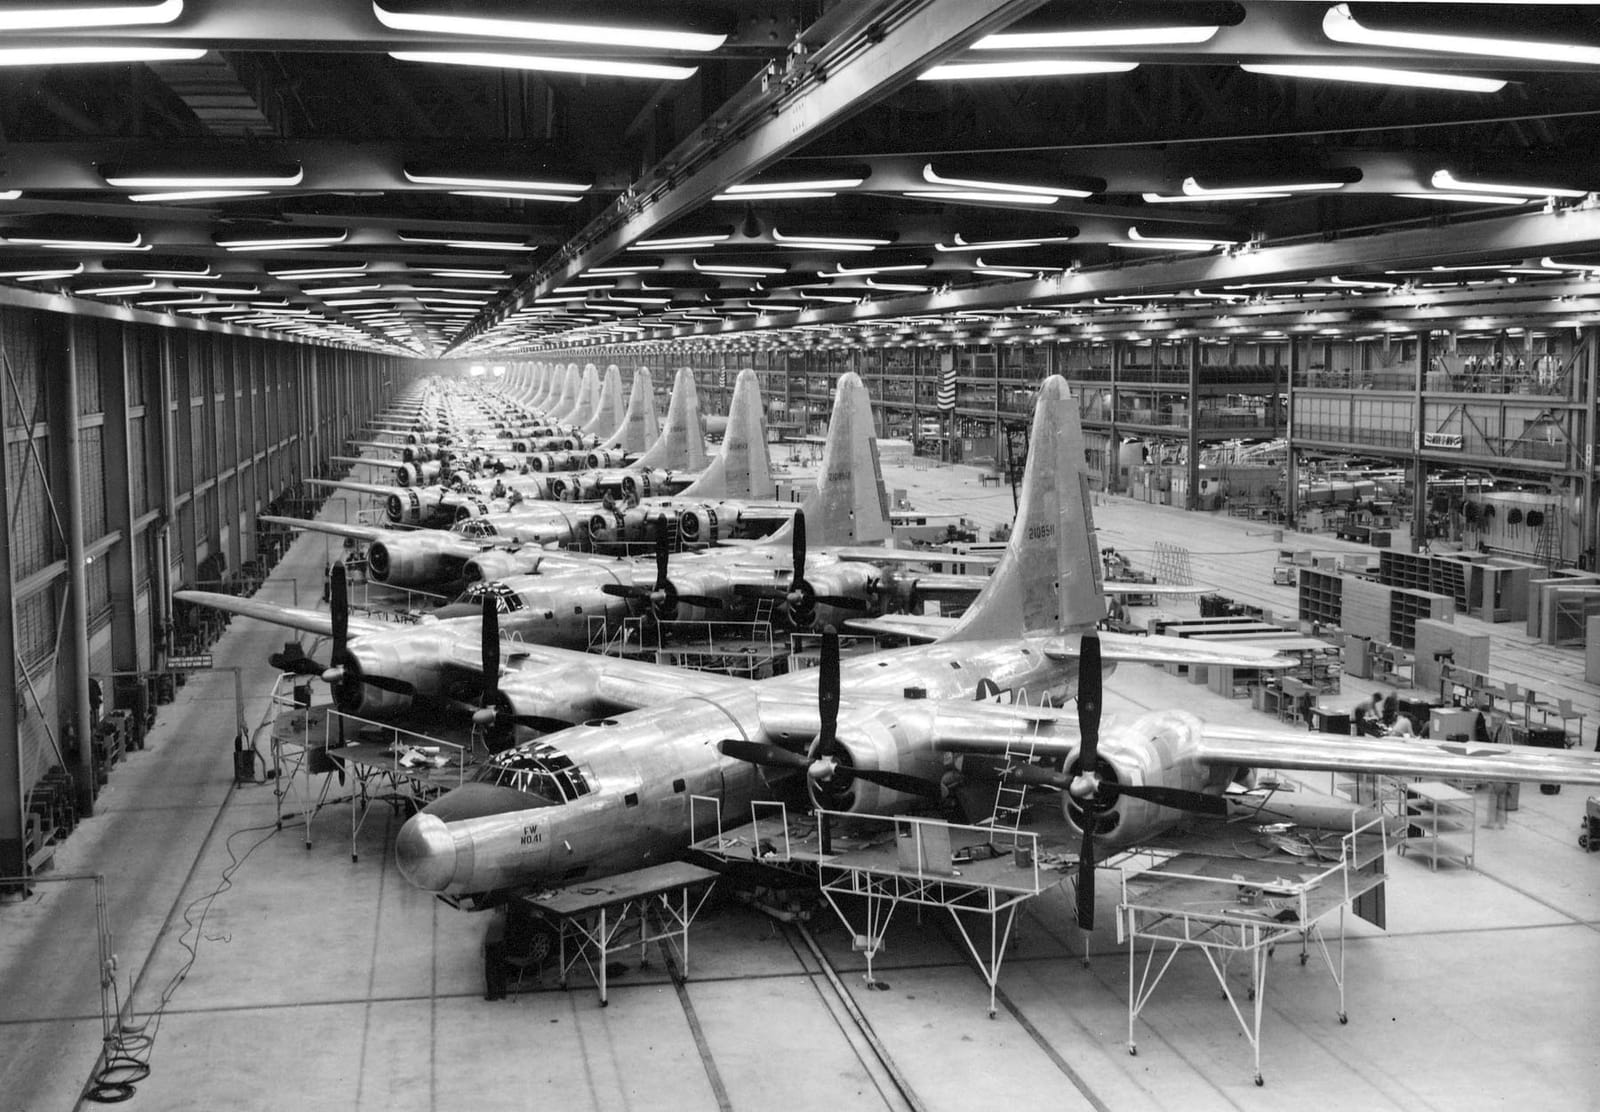 TB-32s being assembled at Consolidated's Fort Worth factory, circa 1944